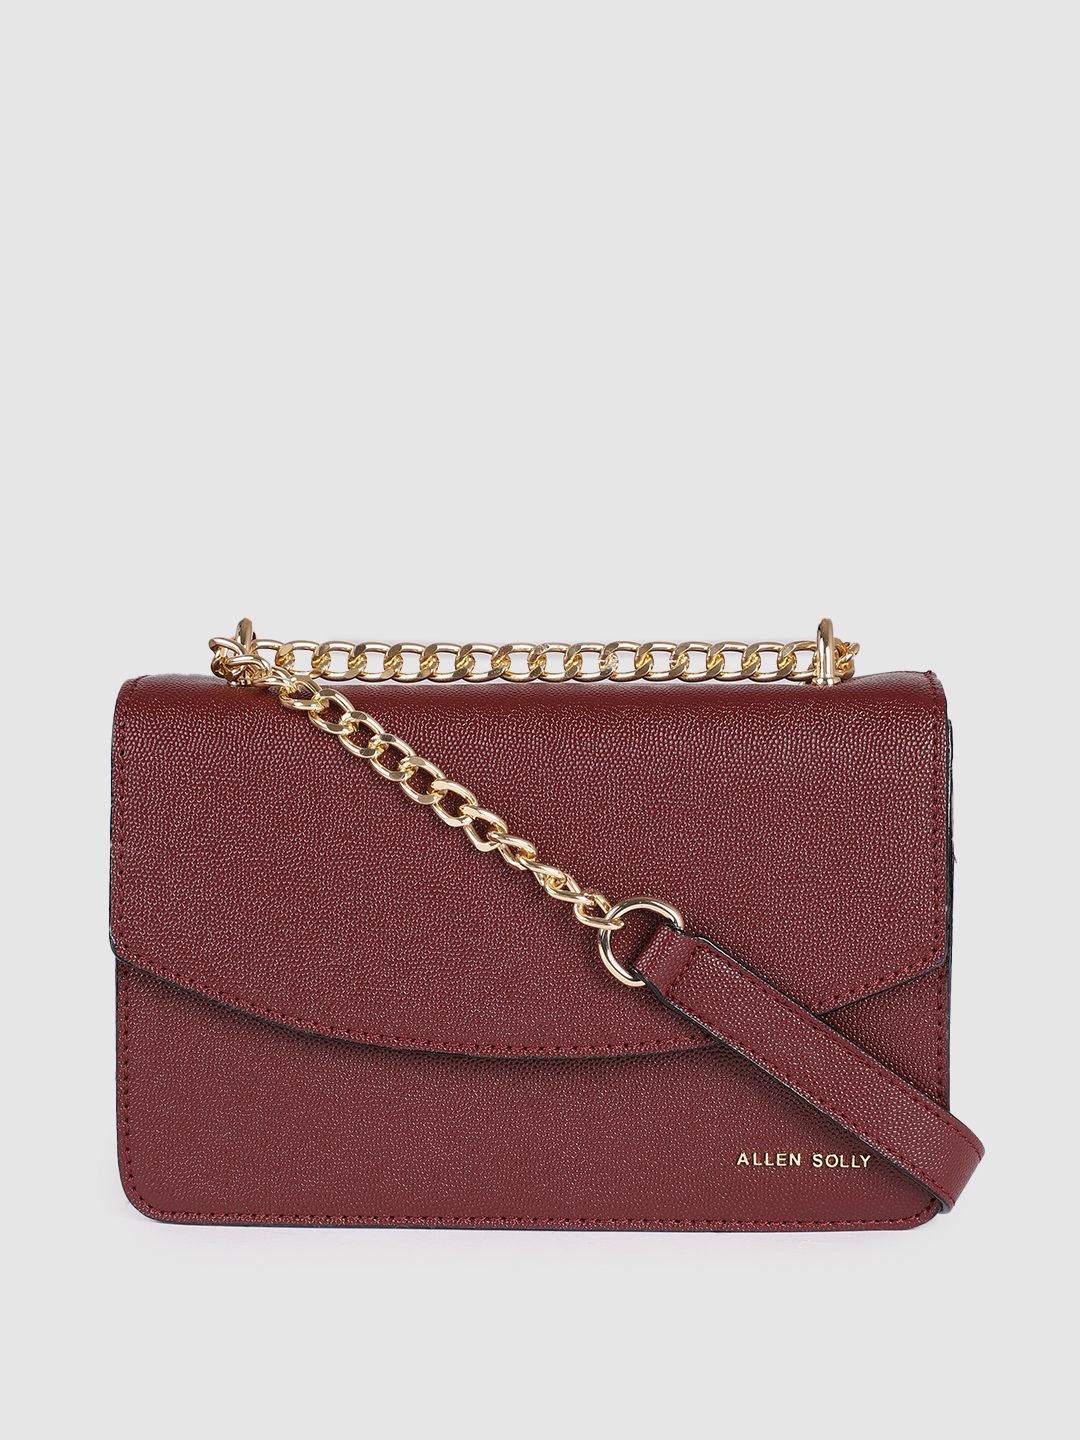 Allen Solly Maroon Solid Sling Bag Price in India